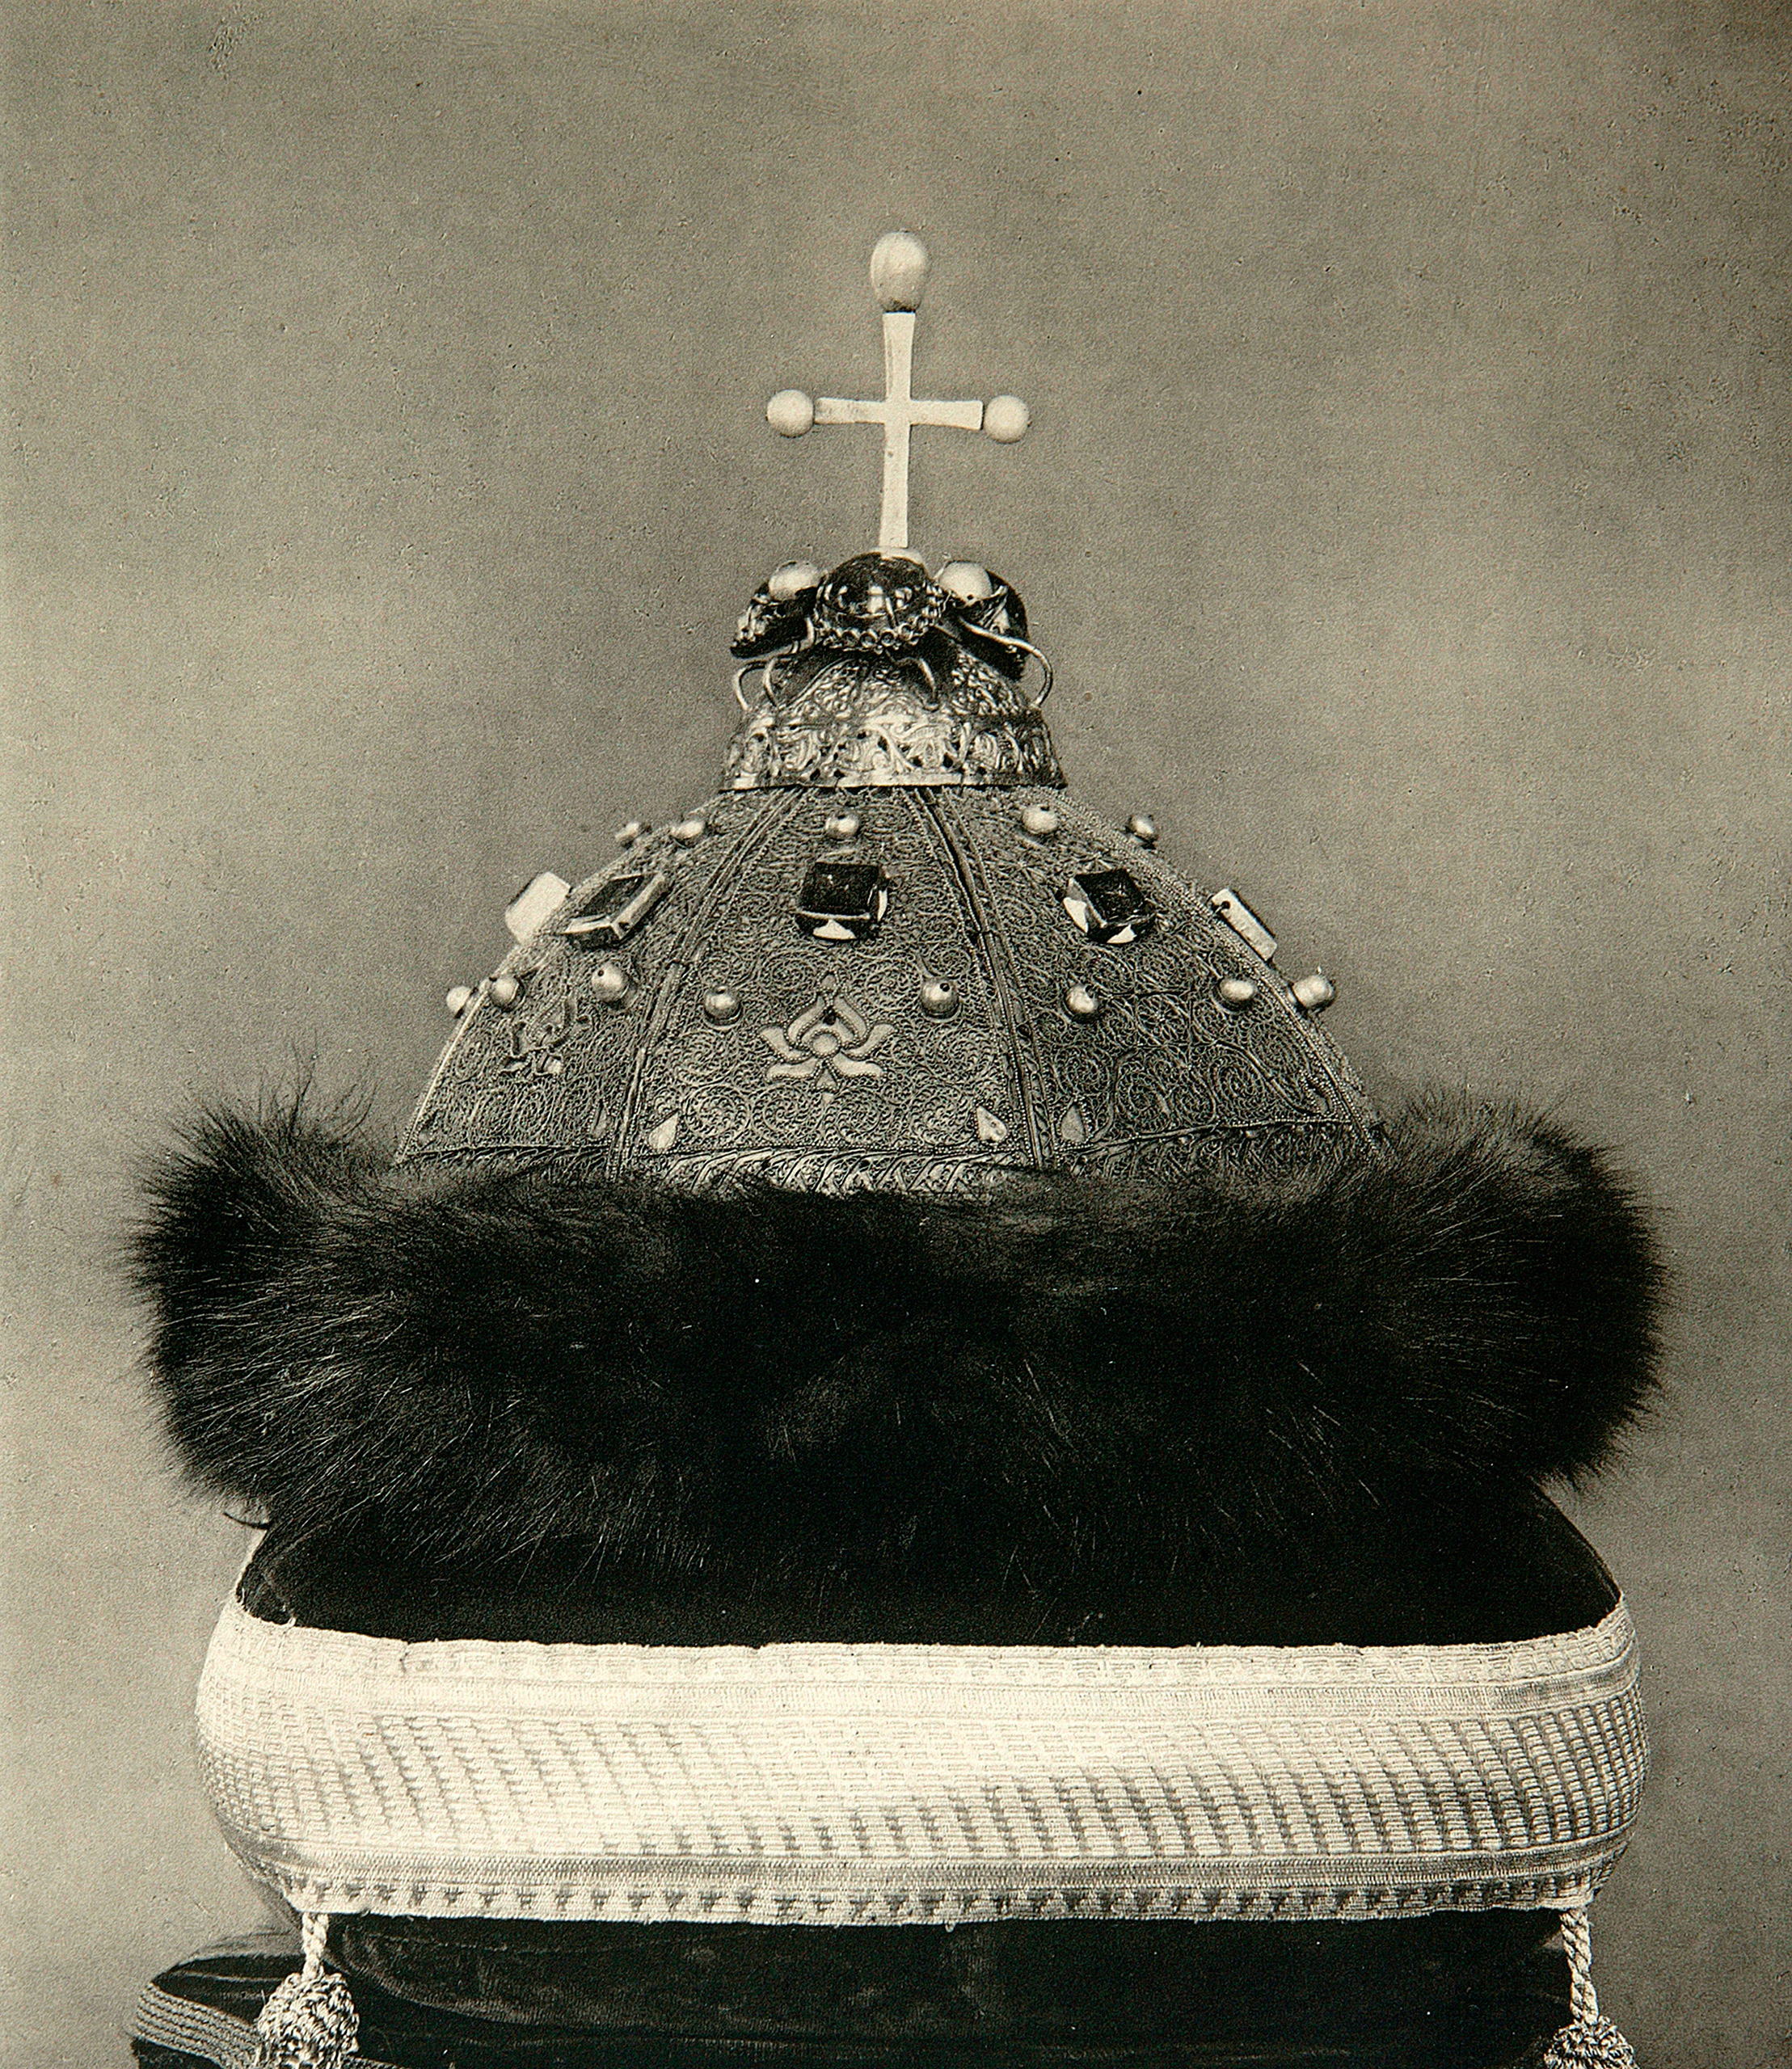 The Monomakh's Cap, before 1884. The Monomakh's Cap was the crown of all Muscovite Grand Princes and Tsars from Dmitri Donskoi to Peter the Great, who replaced it with the Imperial Crown of Russia in 1721. A skullcap decorated with precious stones and pea.